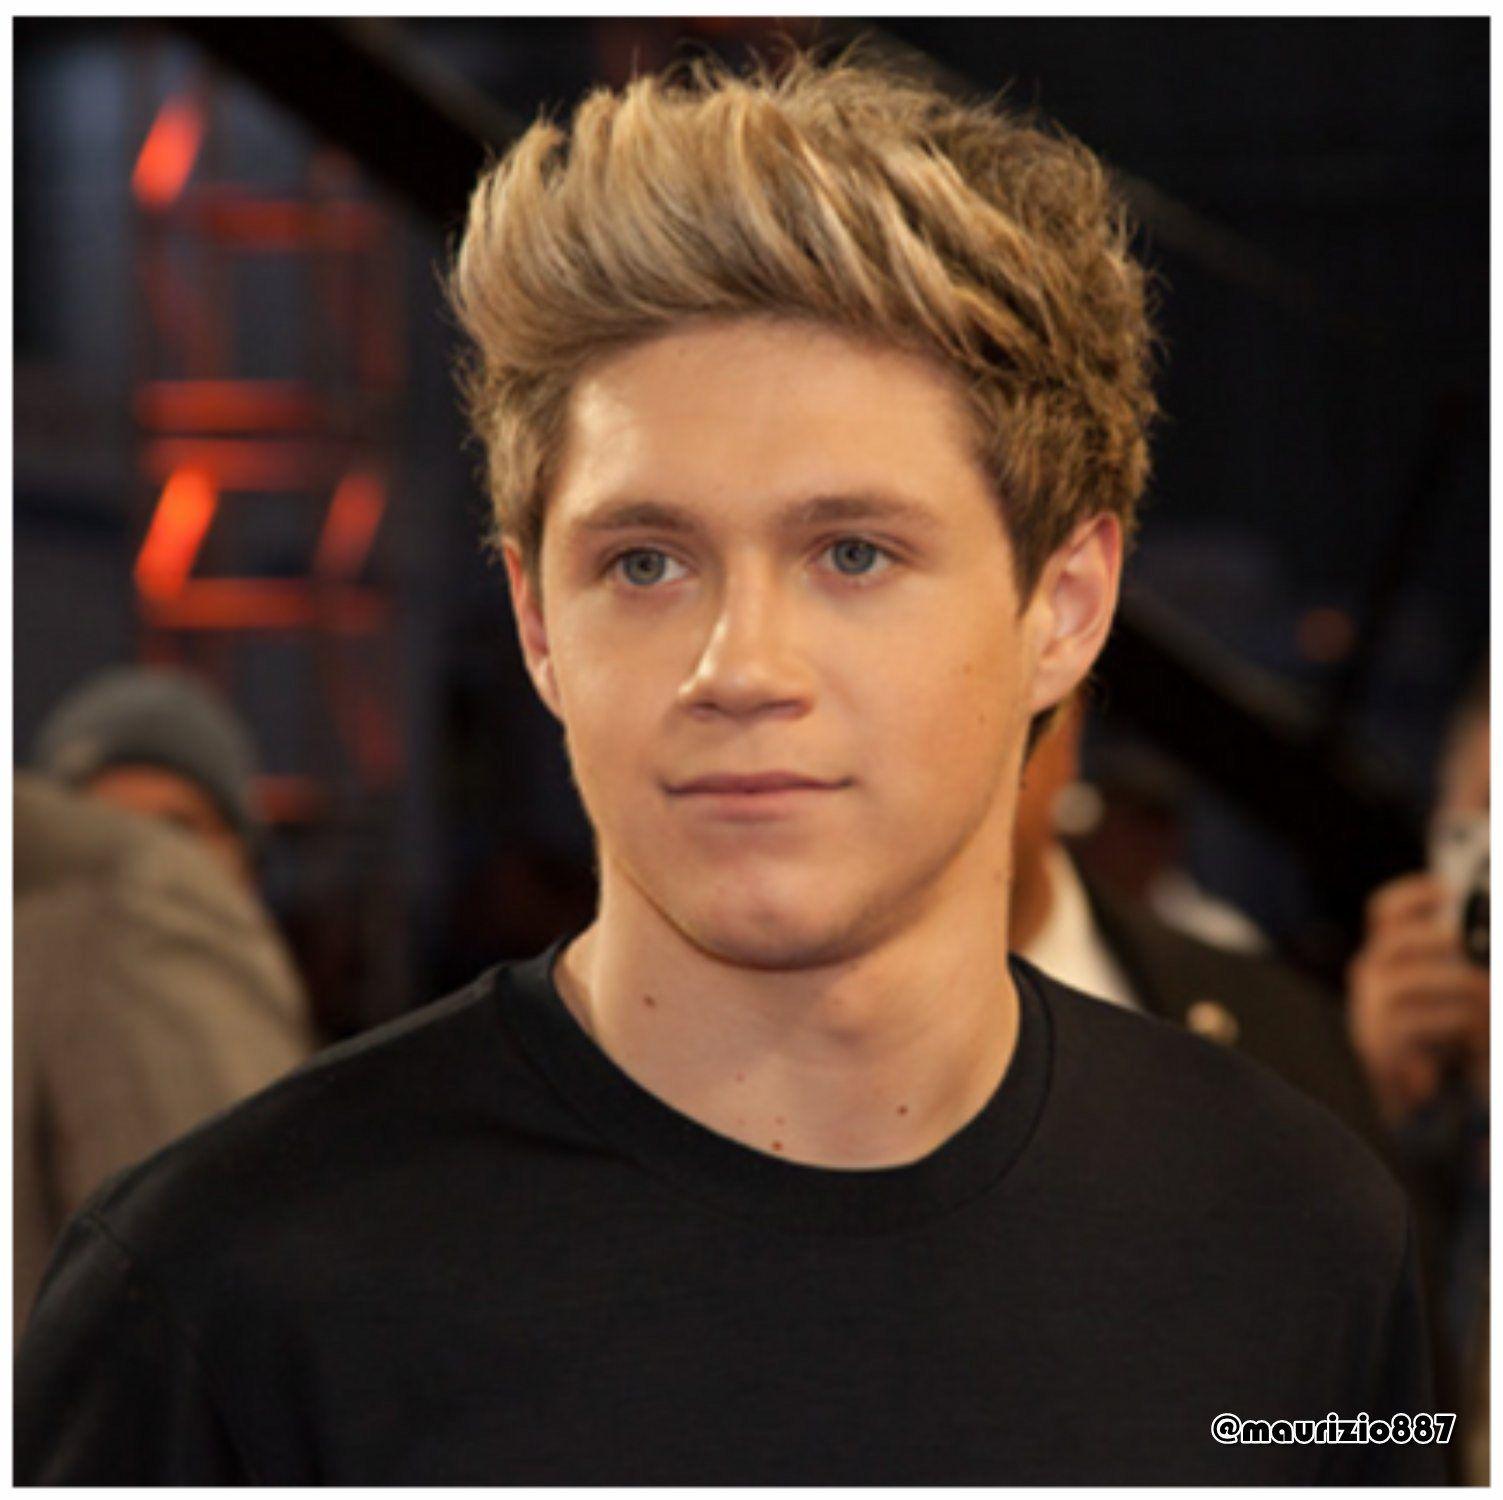 Niall Horan 2012 One Direction 33119356 1503. One